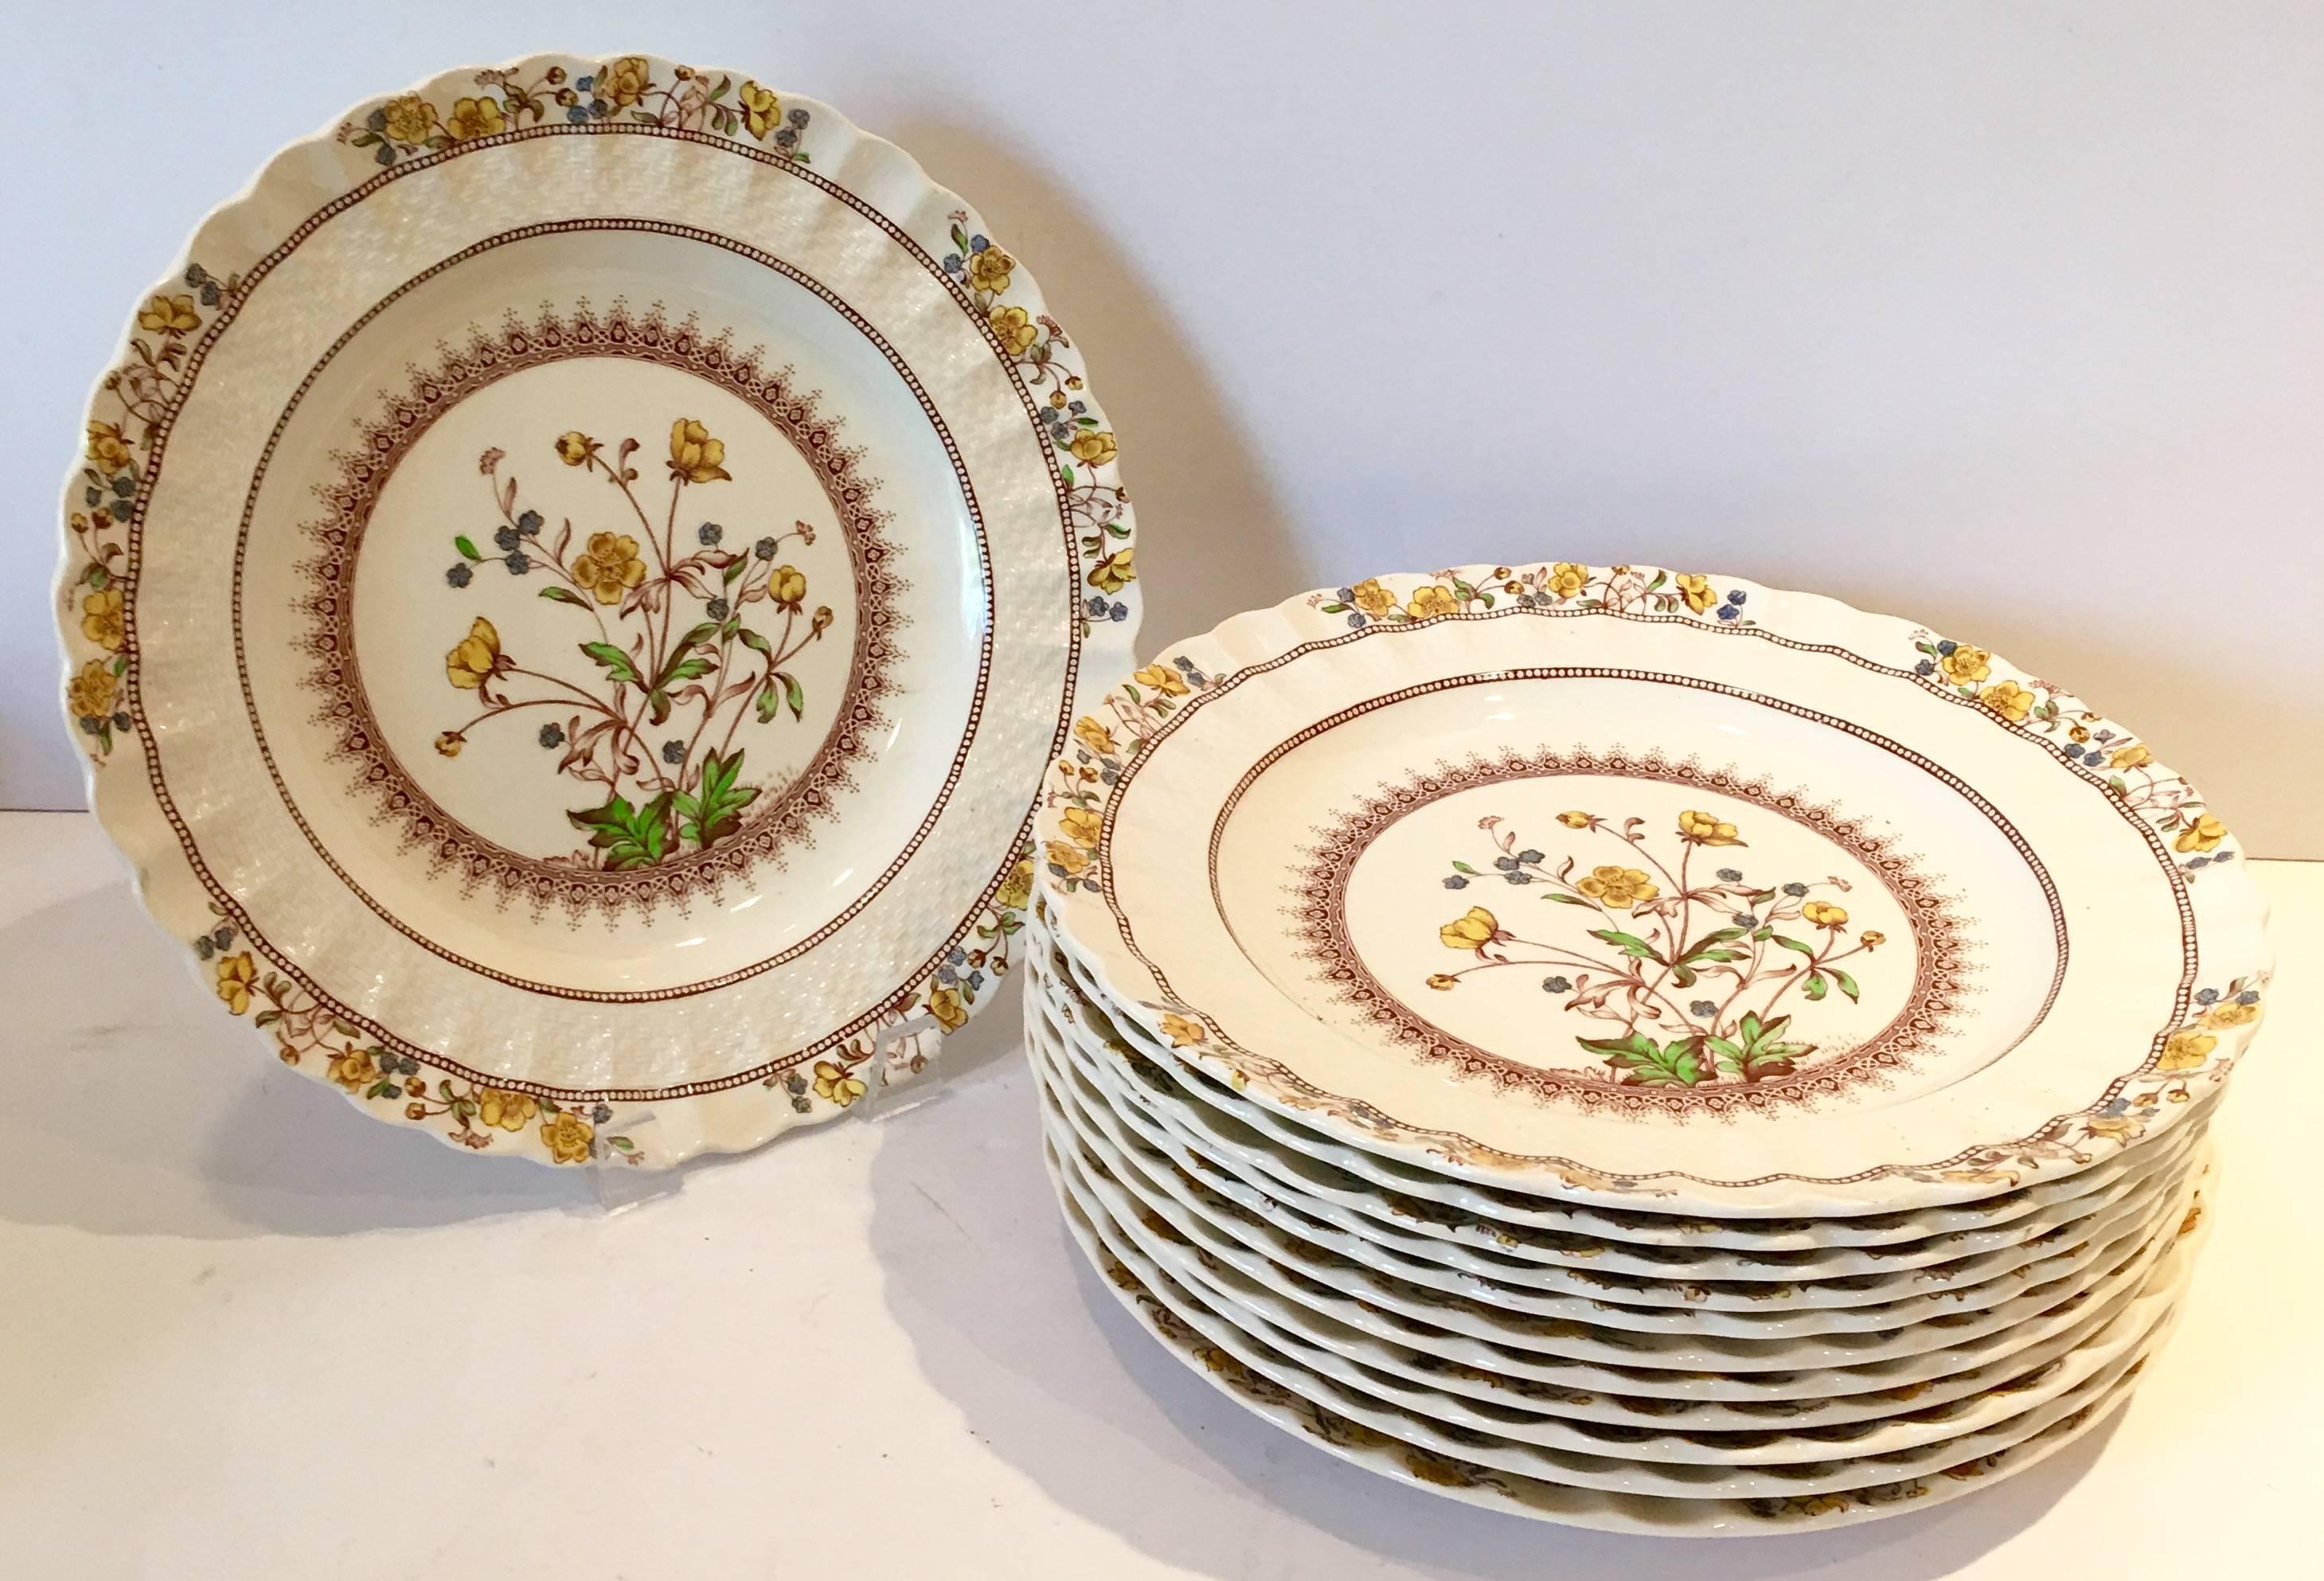 A rare 40 piece set of spode England earthenware "Buttercup" pattern. Set includes, 12 dinner plates, 10.5" diameter. 12 fruit bowls 5.13" diameter, 2 salad/luncheon plates 9" diameter, one lidded oval vegetable and one